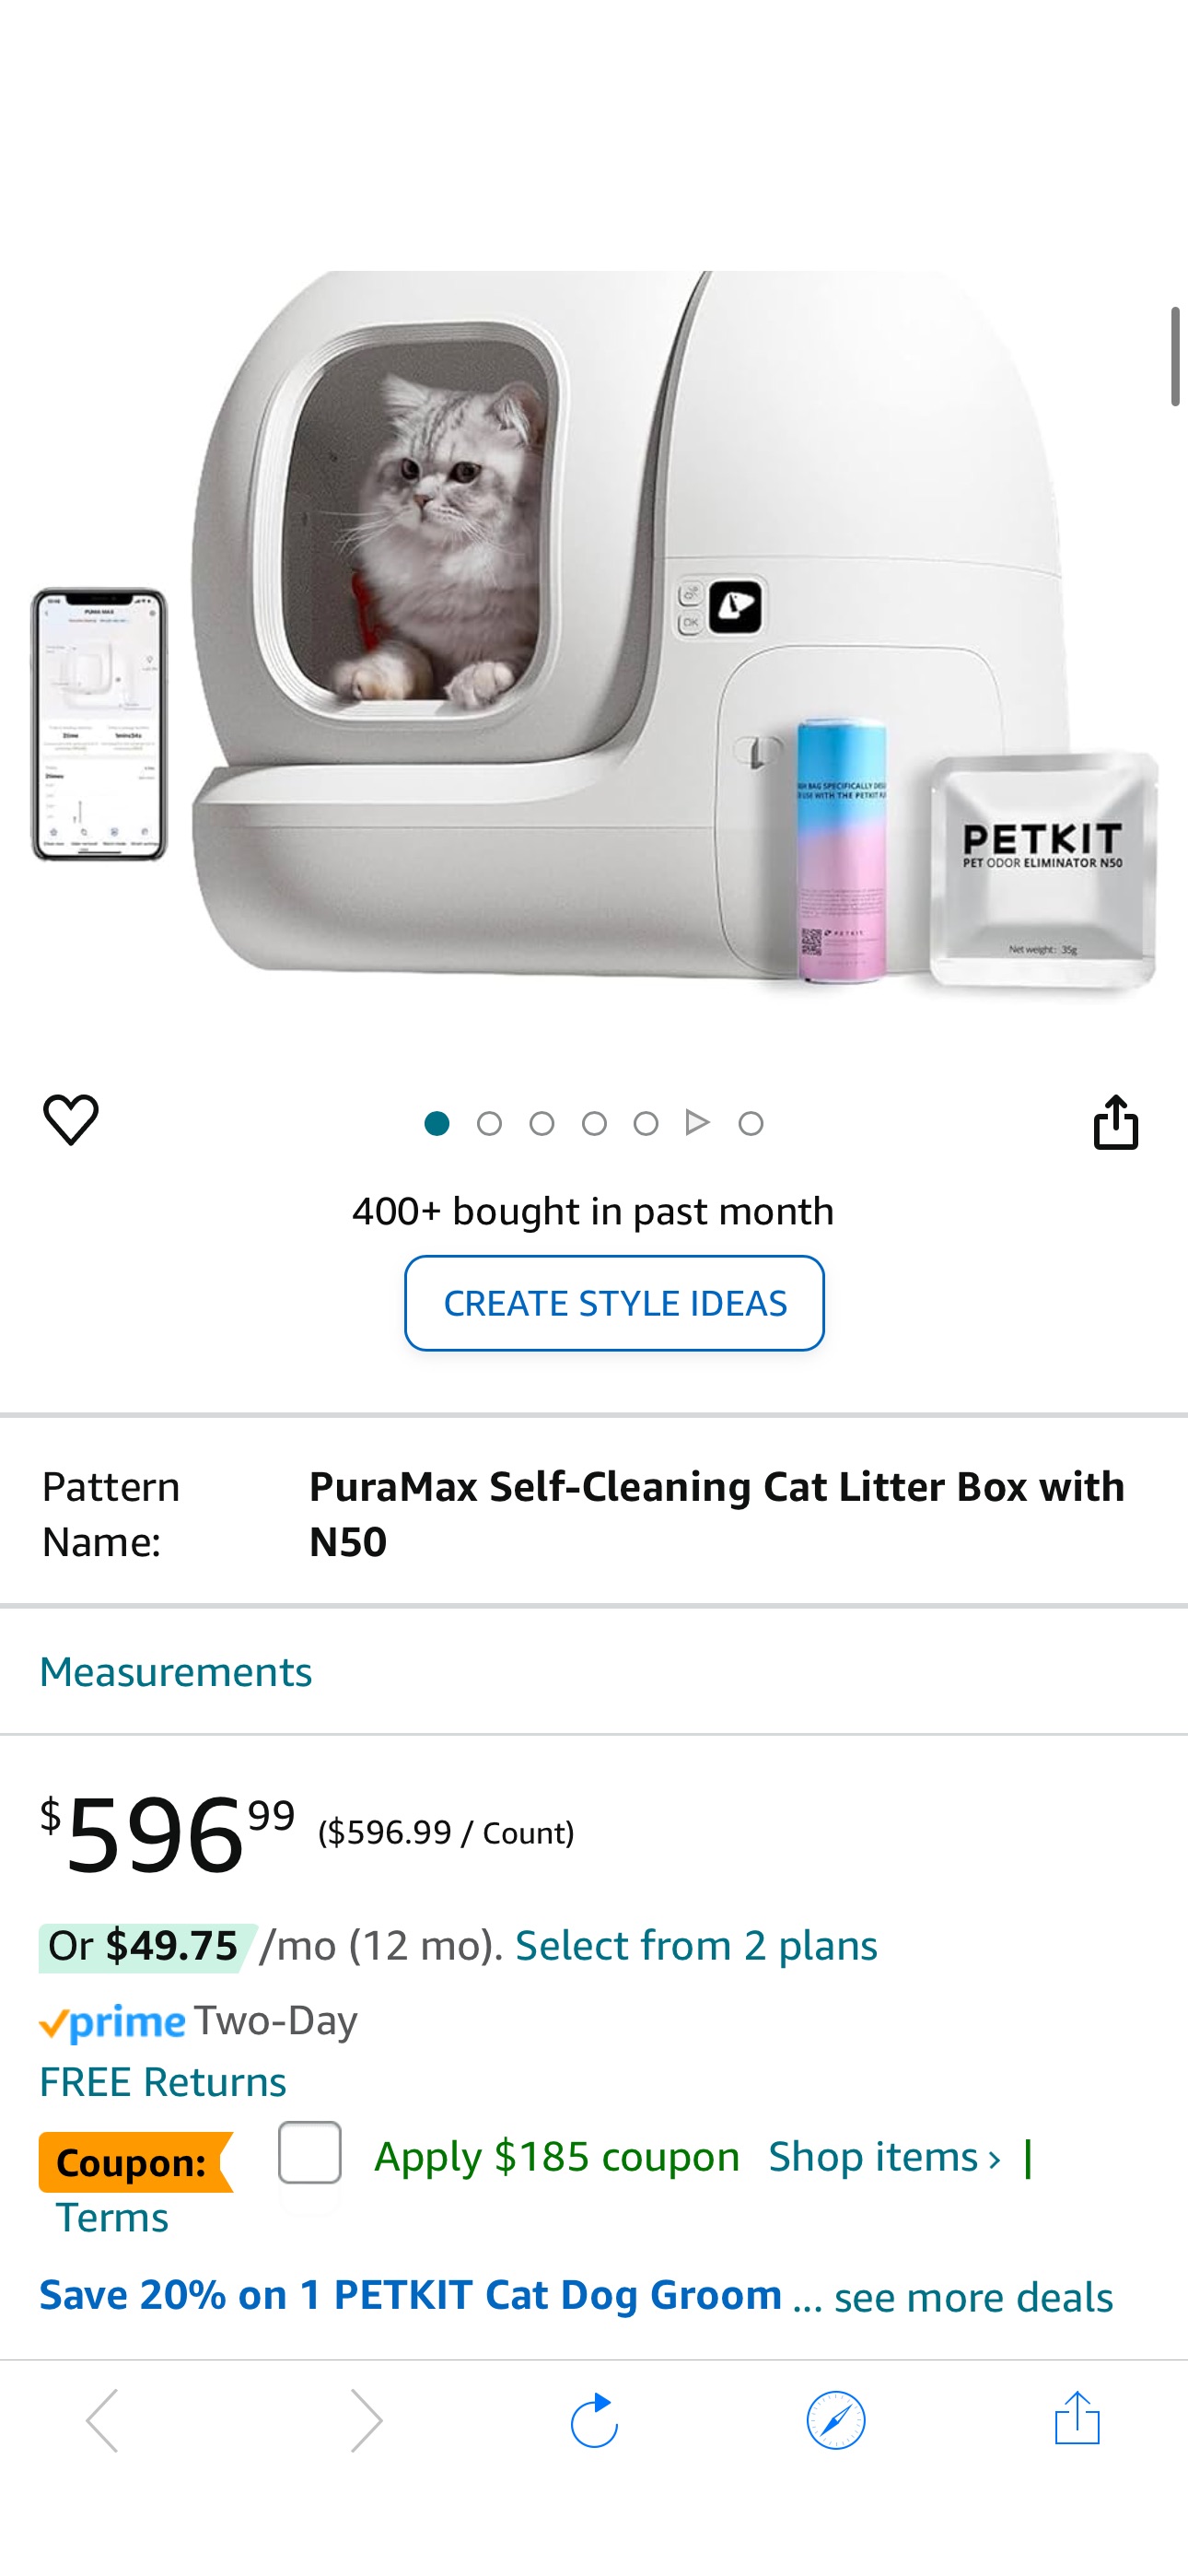 Amazon.com : PETKIT PuraMax Self Cleaning Cat Litter Box, Automatic App Control Smart Litter Box with 76L X-Large Space, xSecure Integrated Safety Protection, with N50 Odor Eliminator coupon